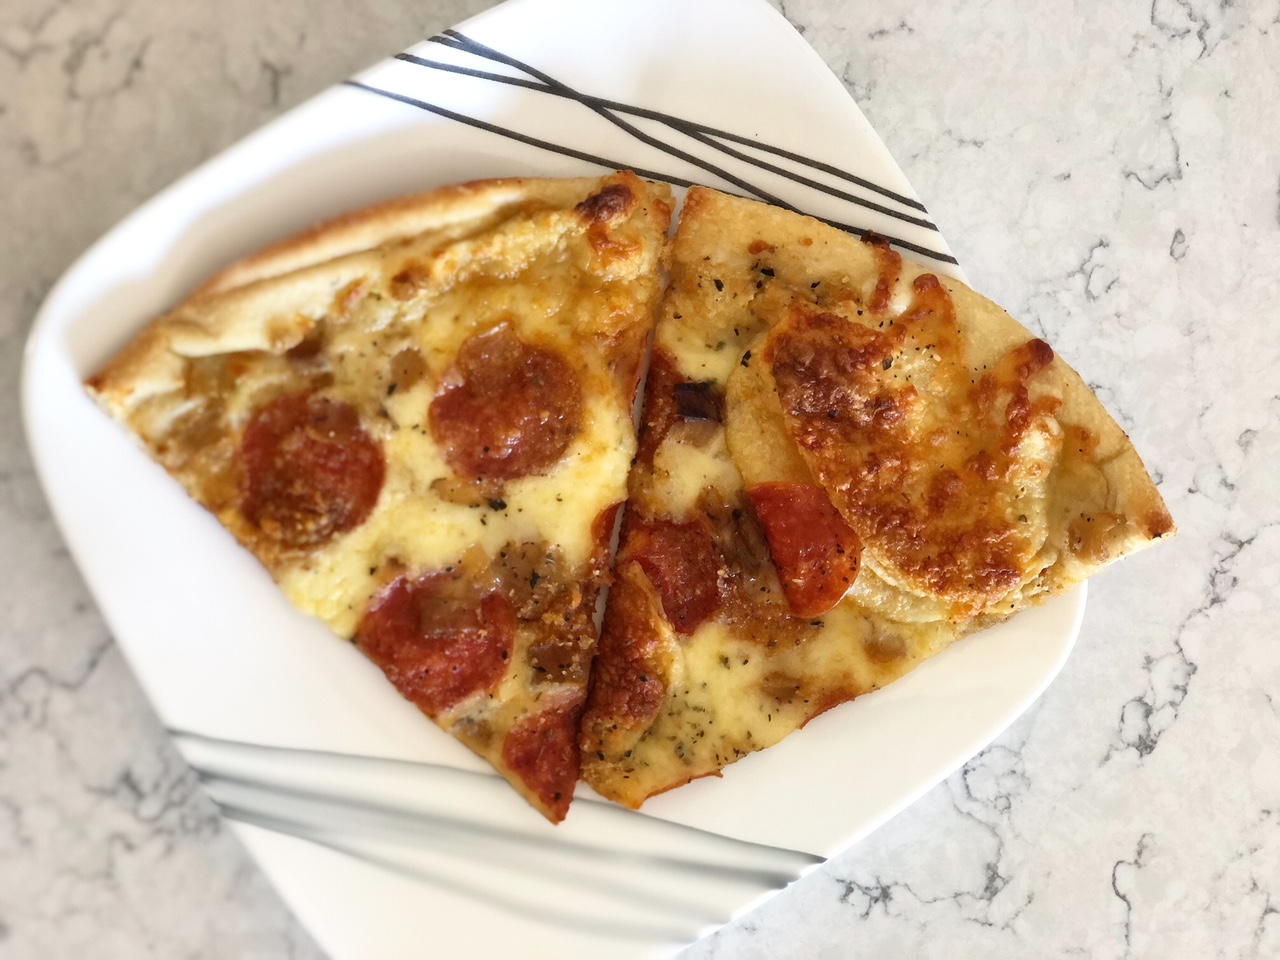 Two slices of pizza are on a white plate on a marbled counter. Photo by Alyssa Buckley.